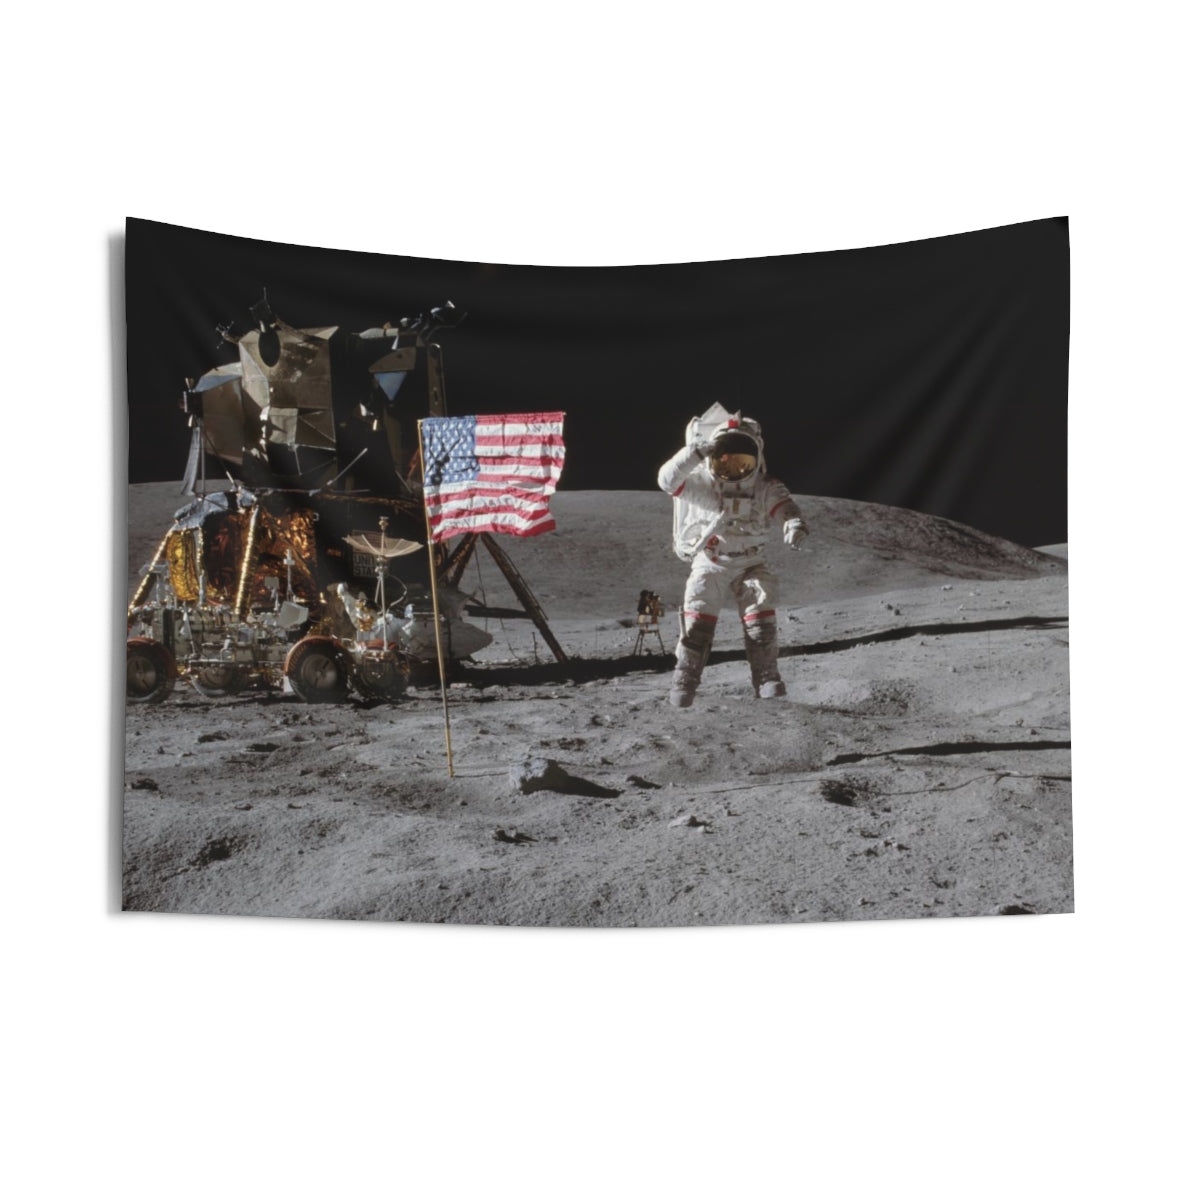 Moon Landing Tapestry, Astronaut On Lunar Surface USA Flag, Indoor Wall Tapestries Art Hanging Decor Home Dorm Room Gift Starcove Fashion